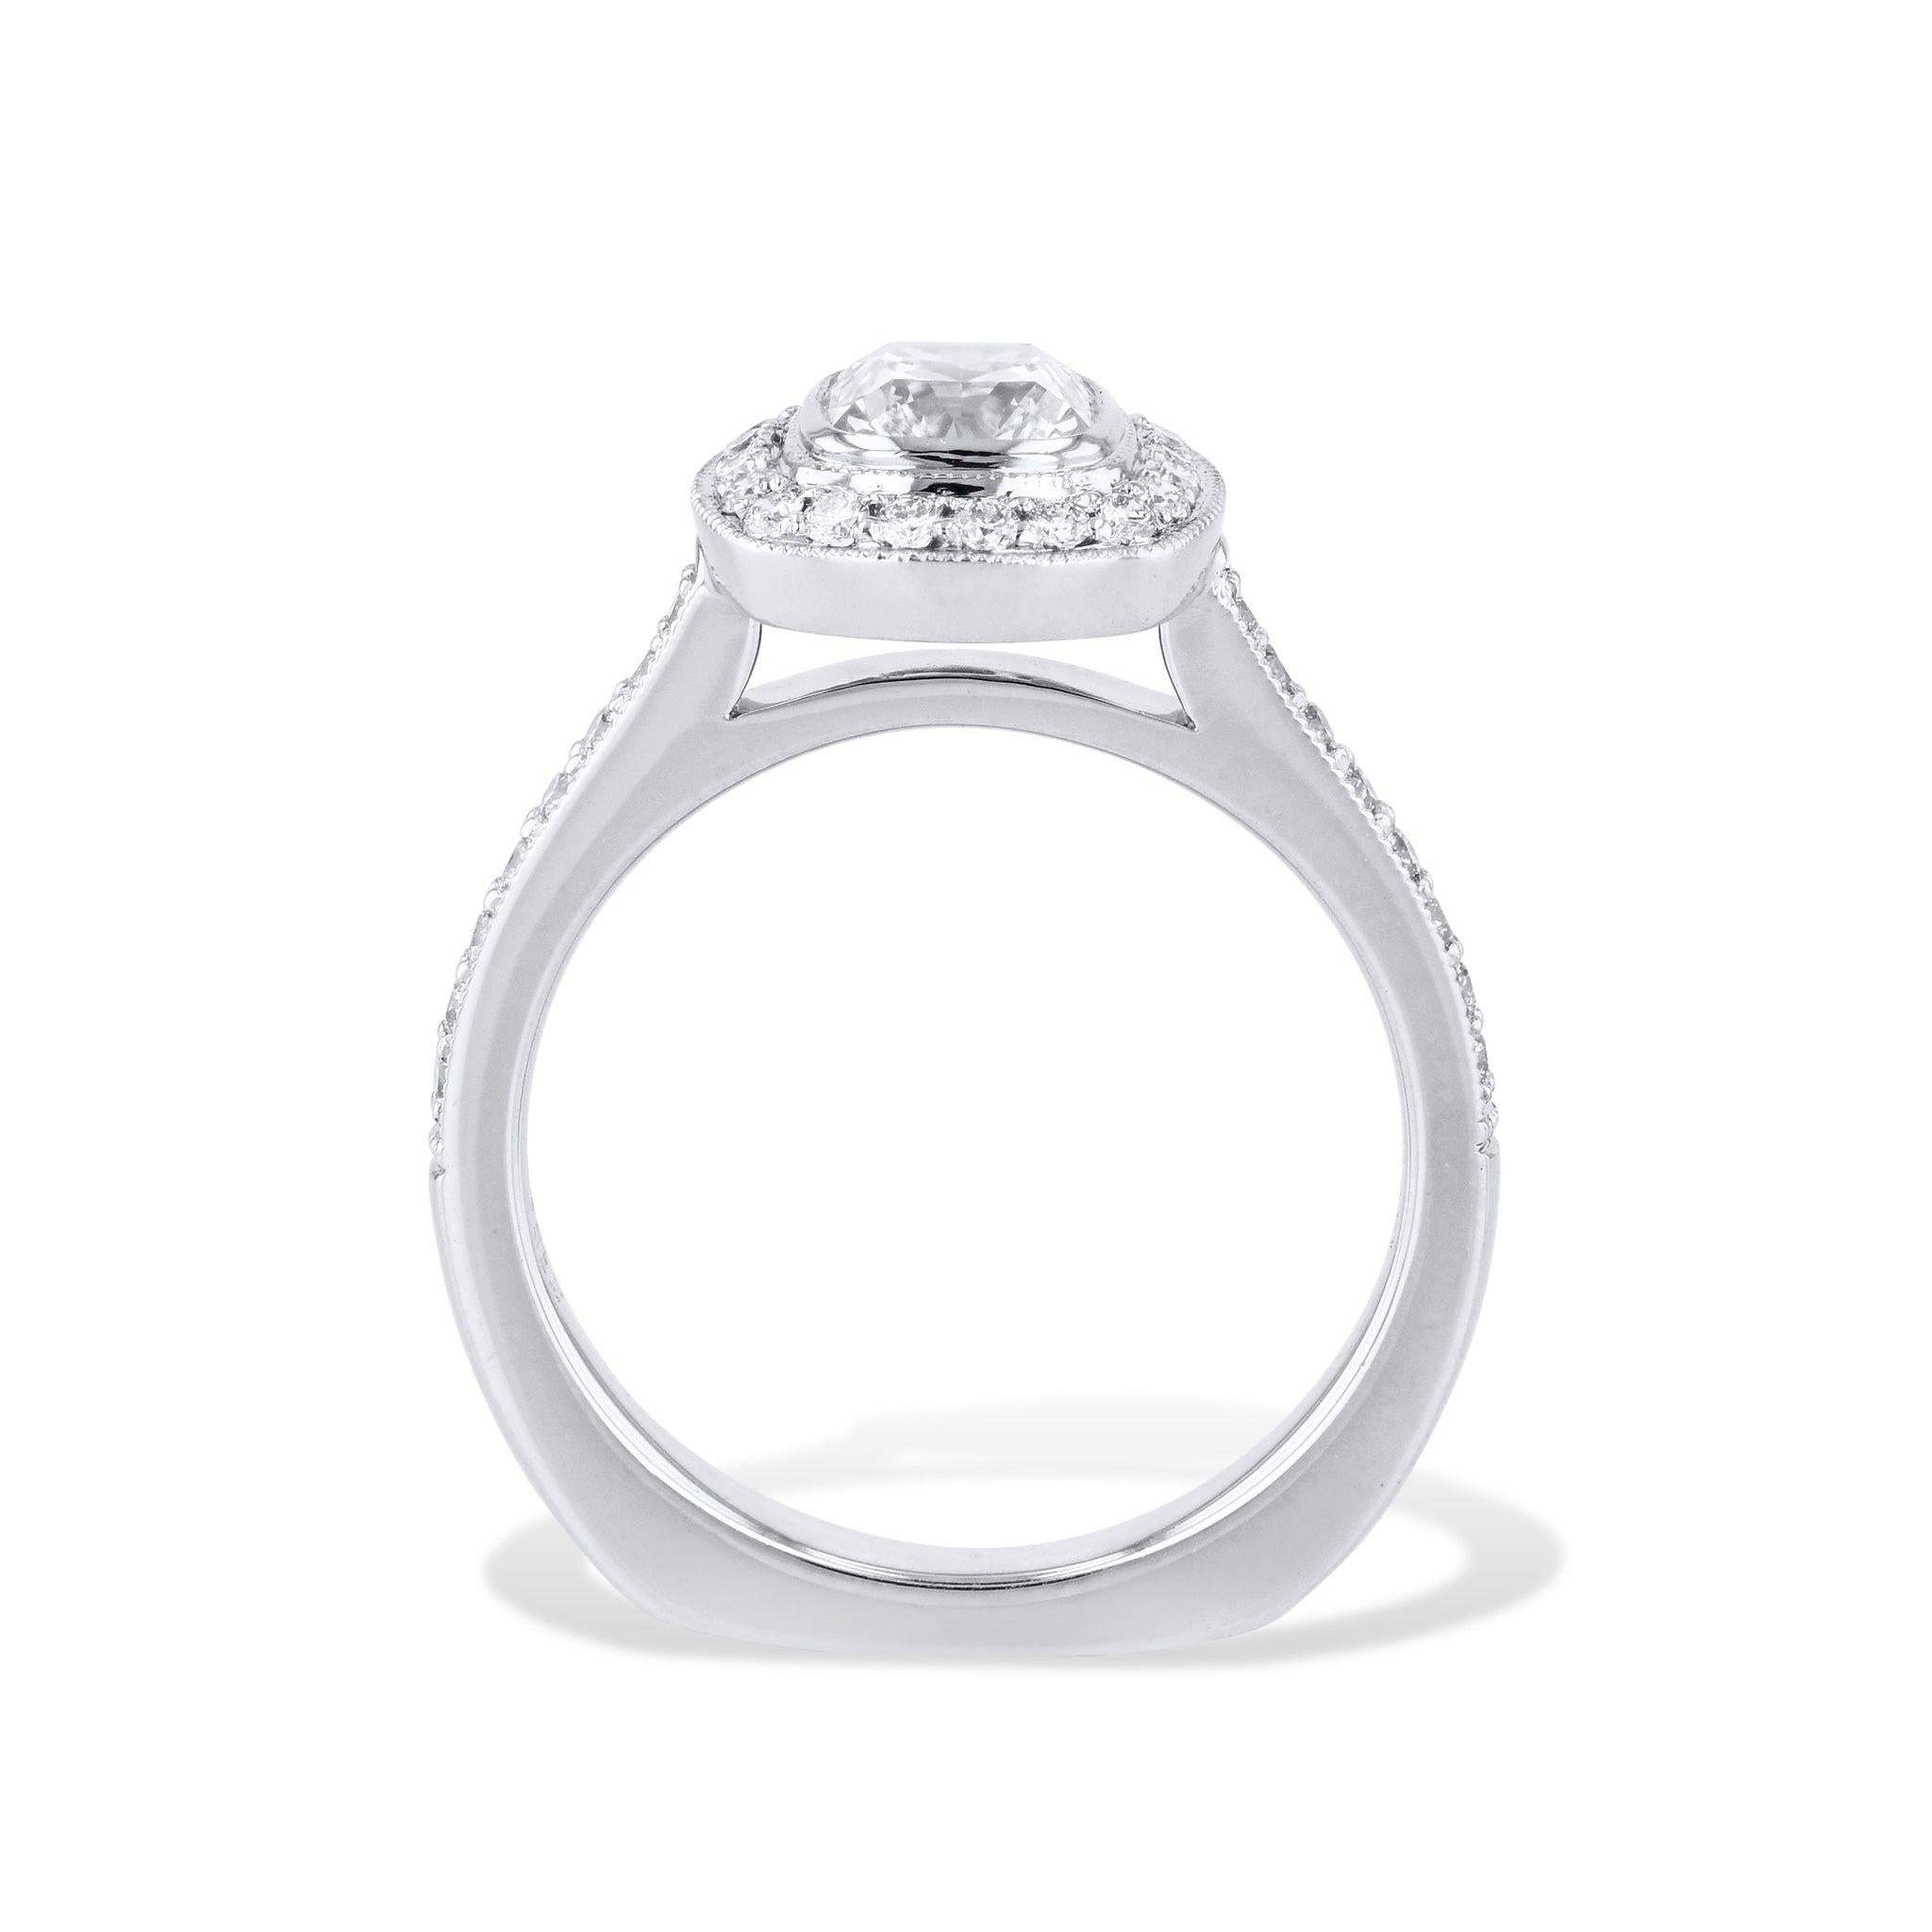 Splendor awaits with this remarkable Brilliant Cushion Cut Diamond Platinum Engagement Ring! The center diamond is a stunning cushion brilliant accented by 37 dazzling pave diamonds. Handmade by H&H, it's a timeless symbol of love!
Brilliant Cushion